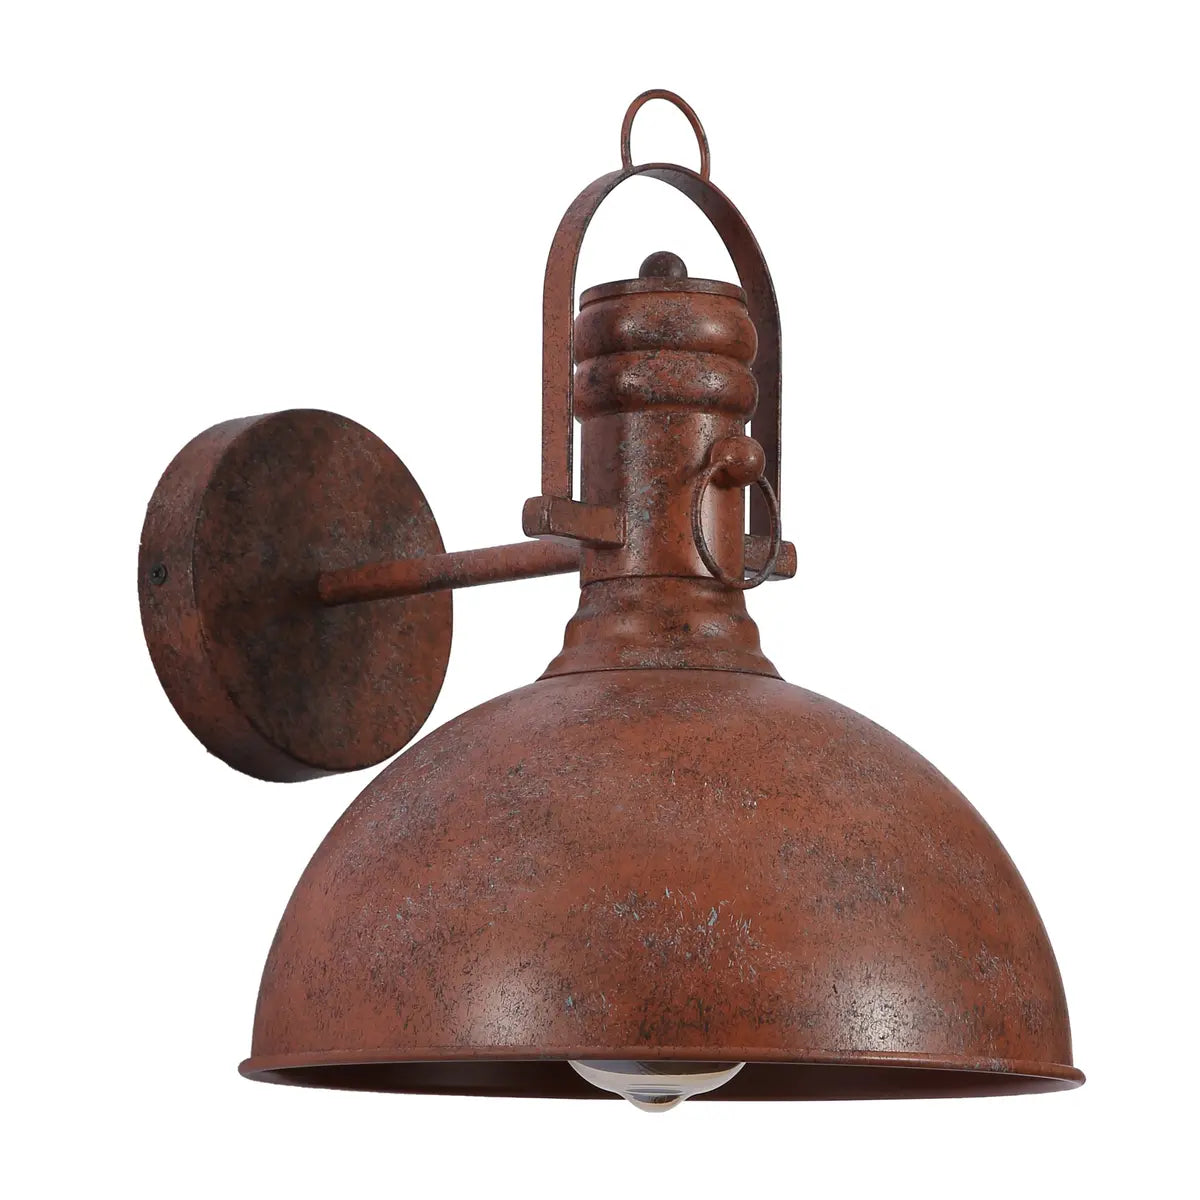 Mian image of Old Brown Metal Dome Wall Light E27 Fitting